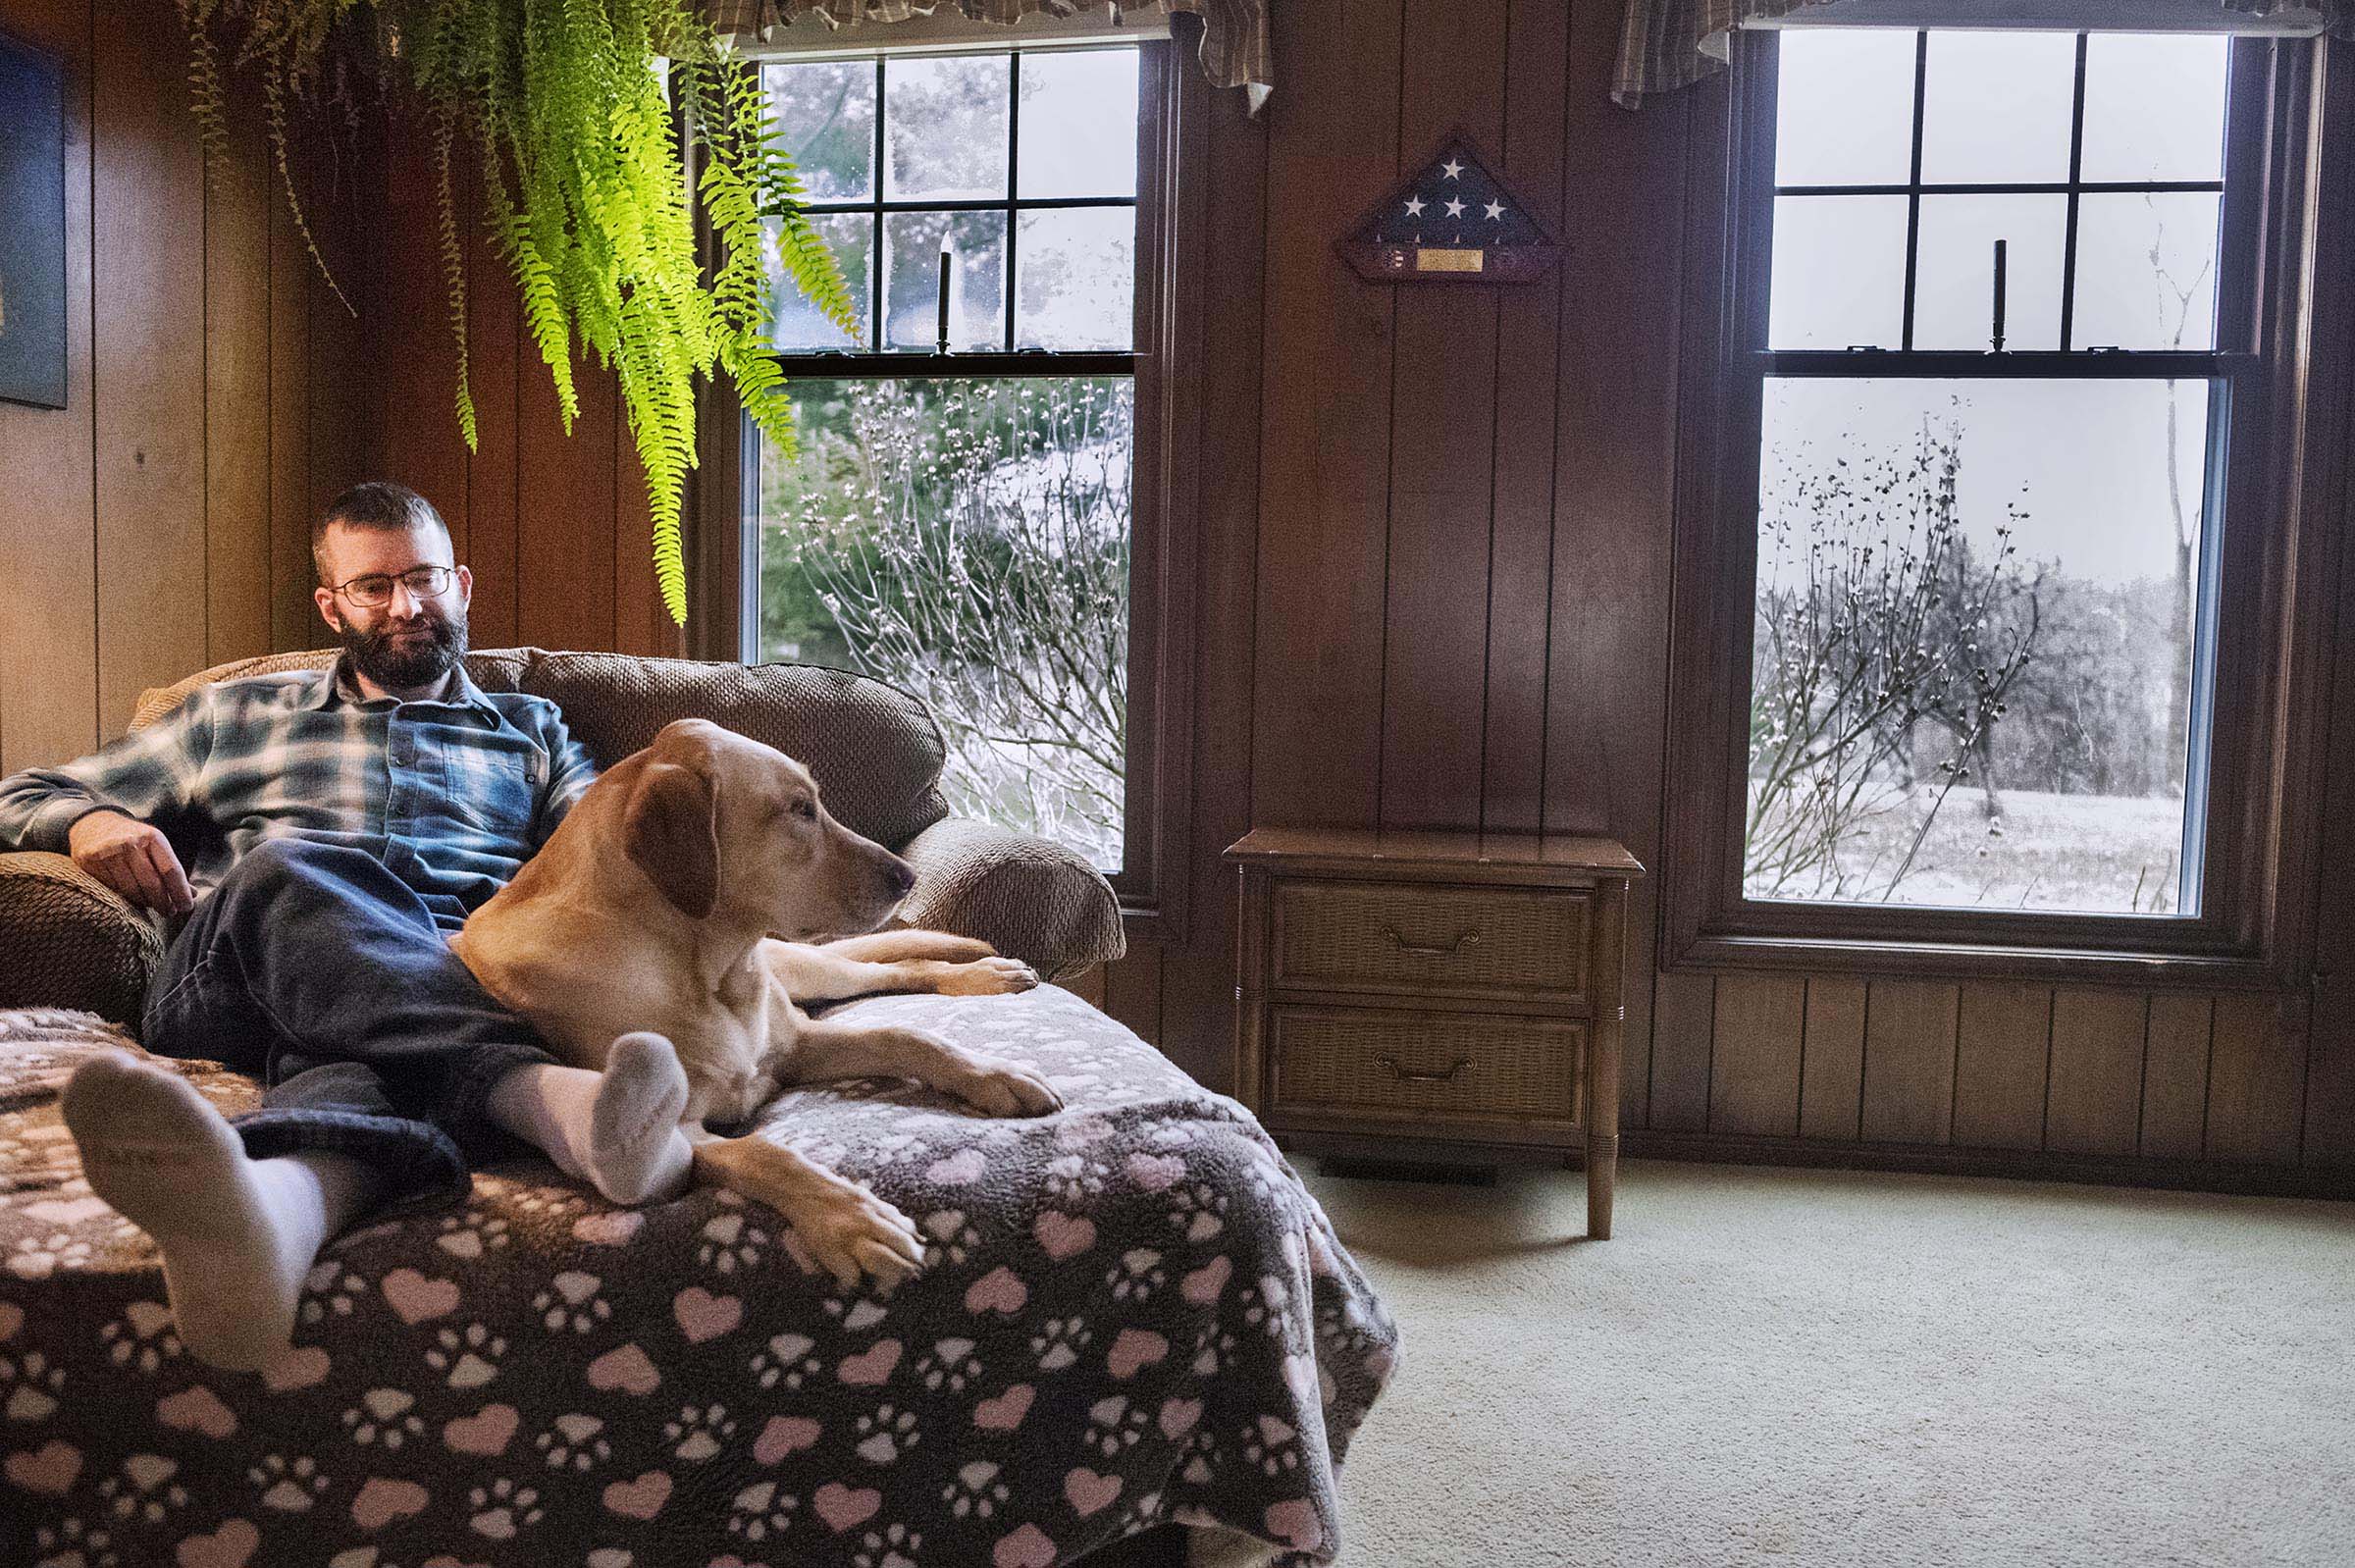    Adam sits on the couch with his mom's dog, Sunny. Adam finds comfort in her presence and when he was first back from deployment found it difficult to connect with people, but easier to connect with dogs.